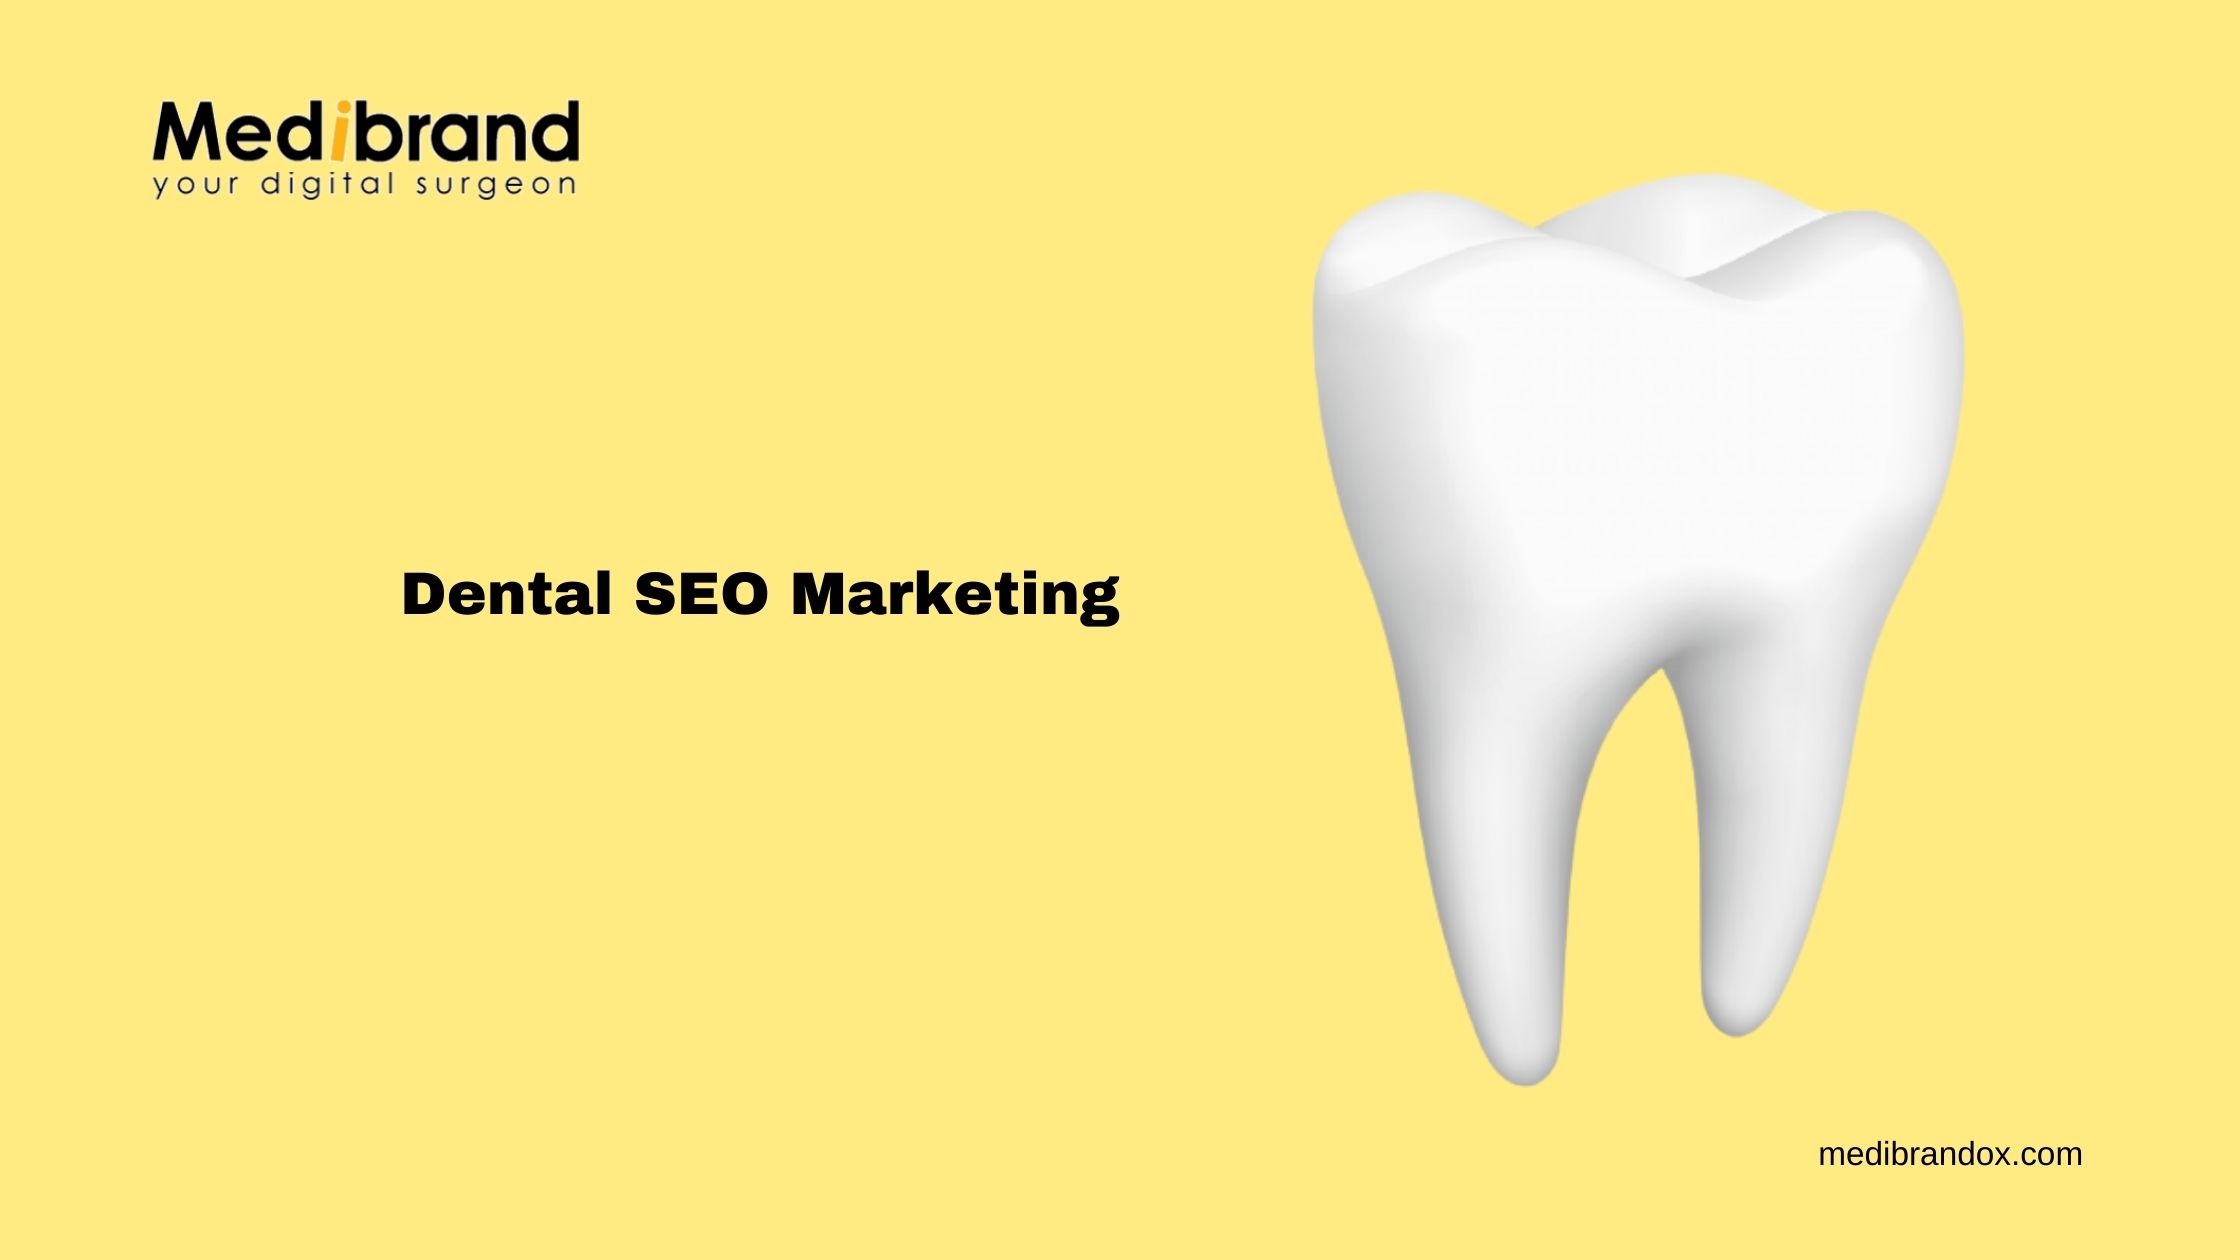 Article about SEO Marketing Company for Dentists and Dental Clinic